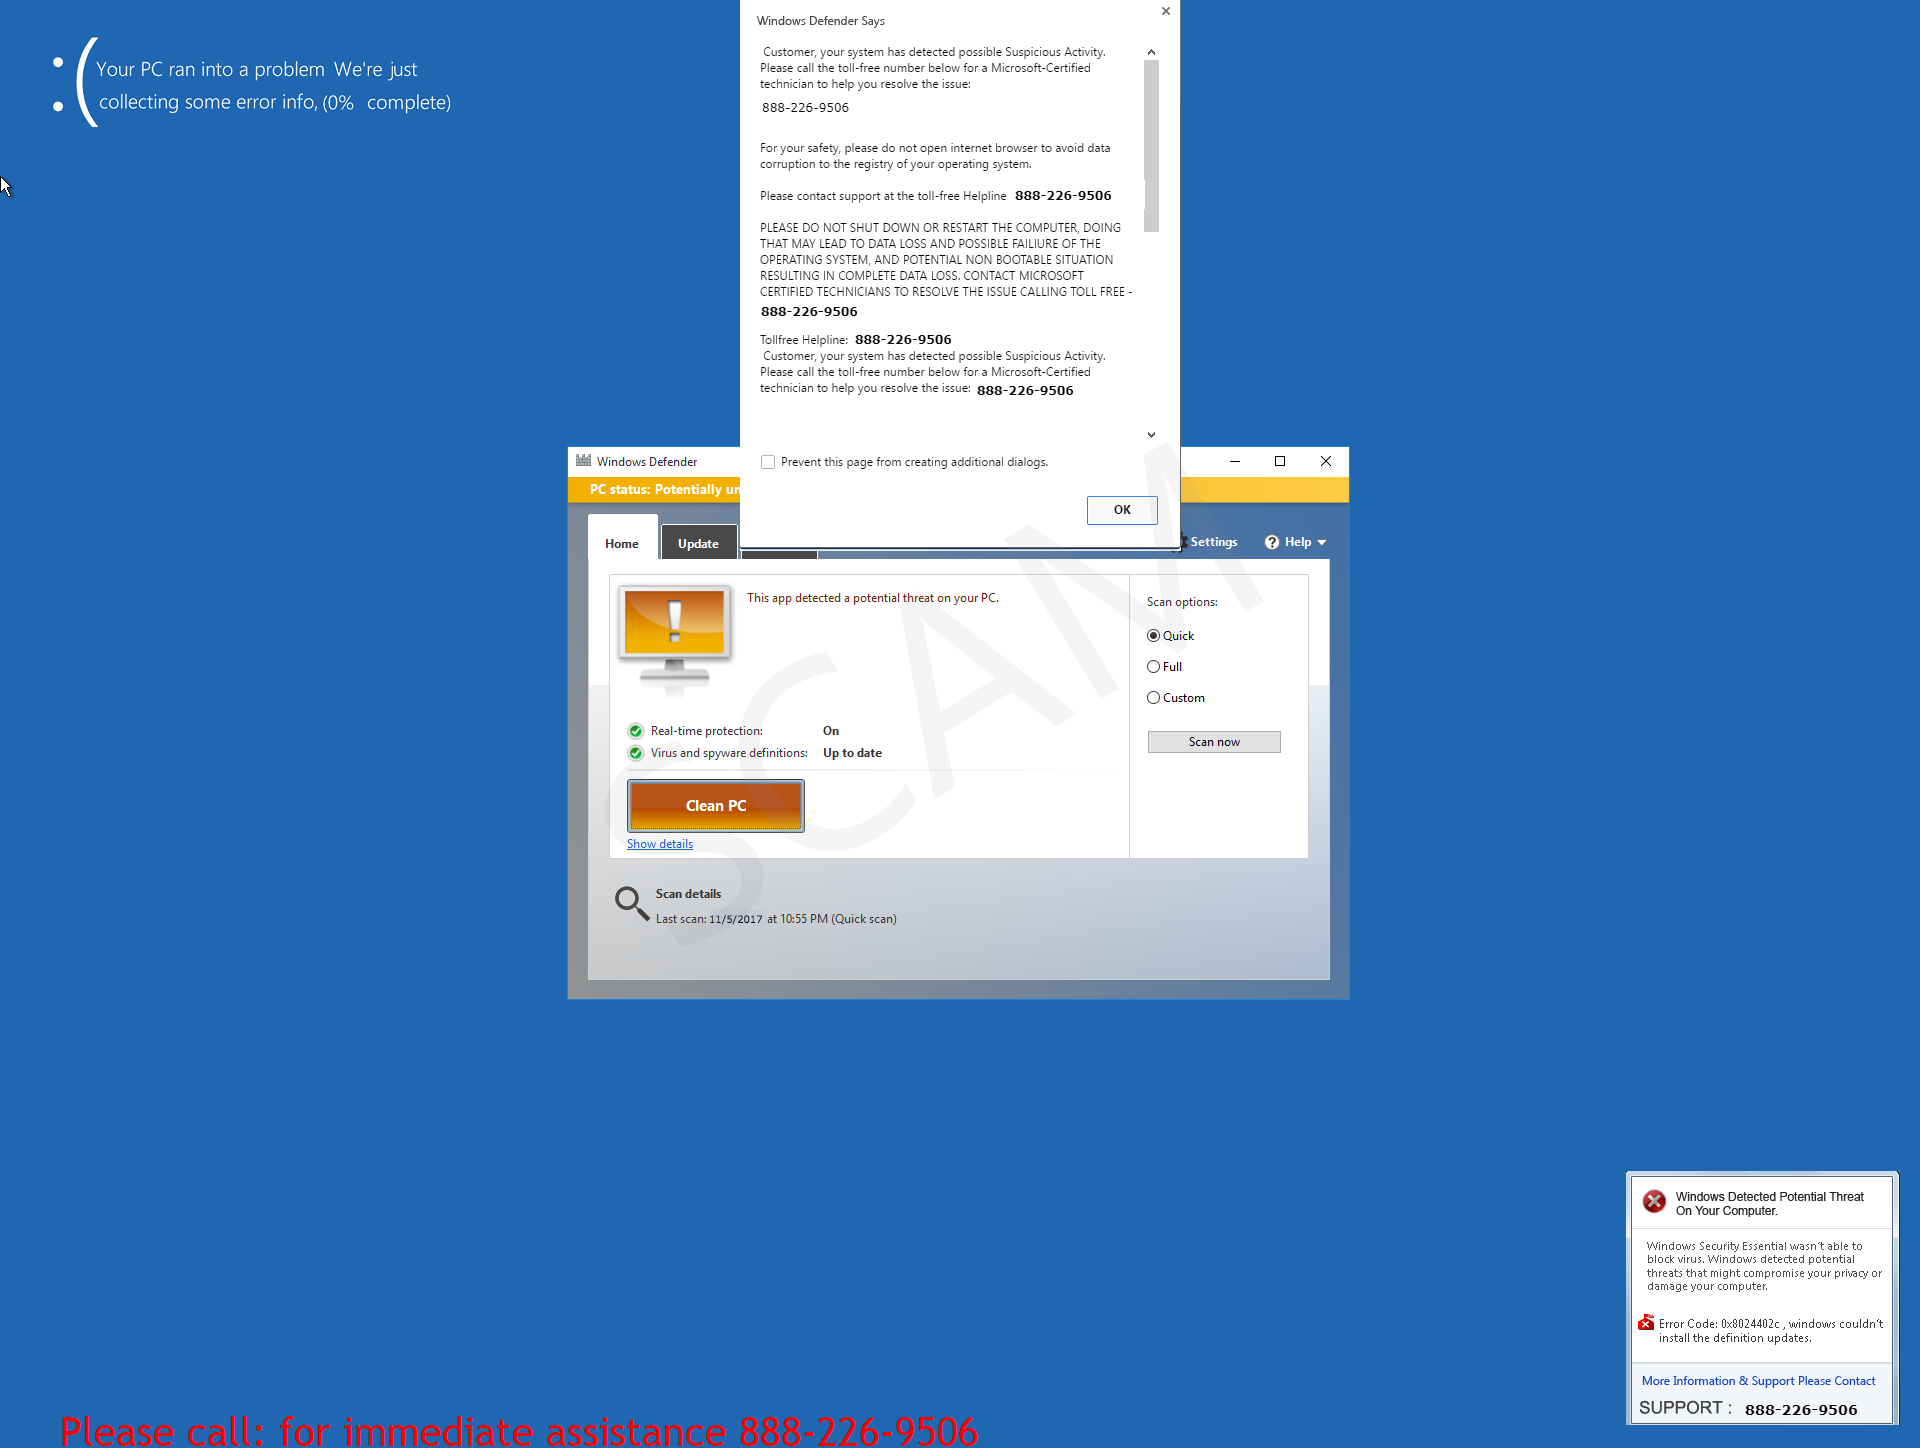 Sas 9.3 Software Free Download For Windows 7